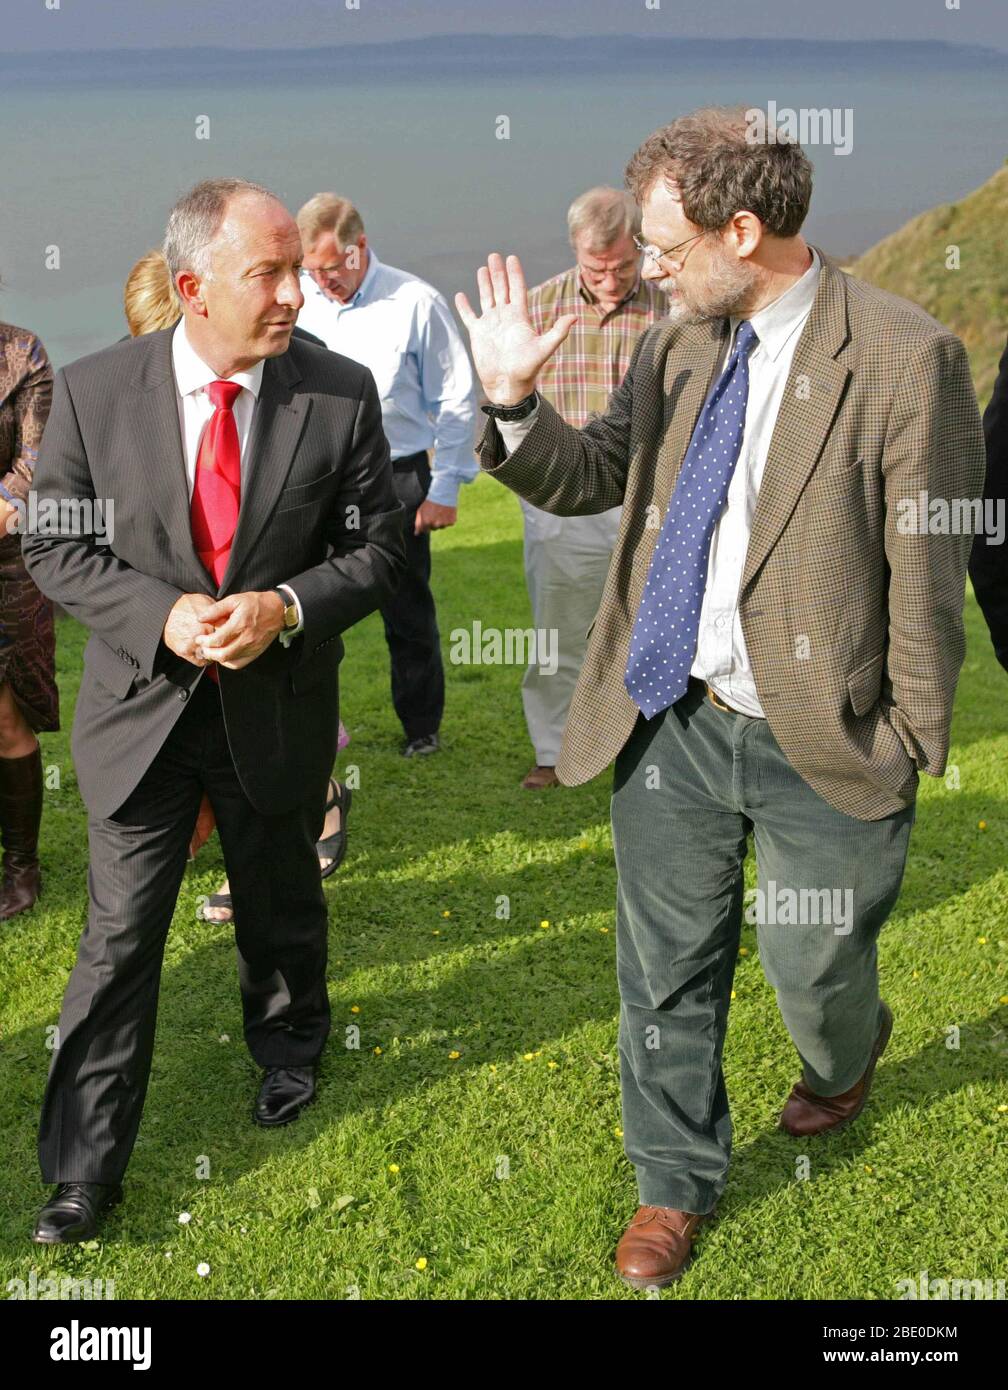 The Irish Minister for Foreign Affairs, Dermot Ahern talks with David Stephens (R), Director of the Corrymeela Reconciliation Centre during a visit to Ballycastle, Northern Ireland, 22 Sept, 2005. Minister Ahern visited a number of community groups in Belfast and Antrim who were most directly affected sectarian attacks and street violence. (Irish Foreign Office Hand Out Photo/Paul McErlane) Stock Photo